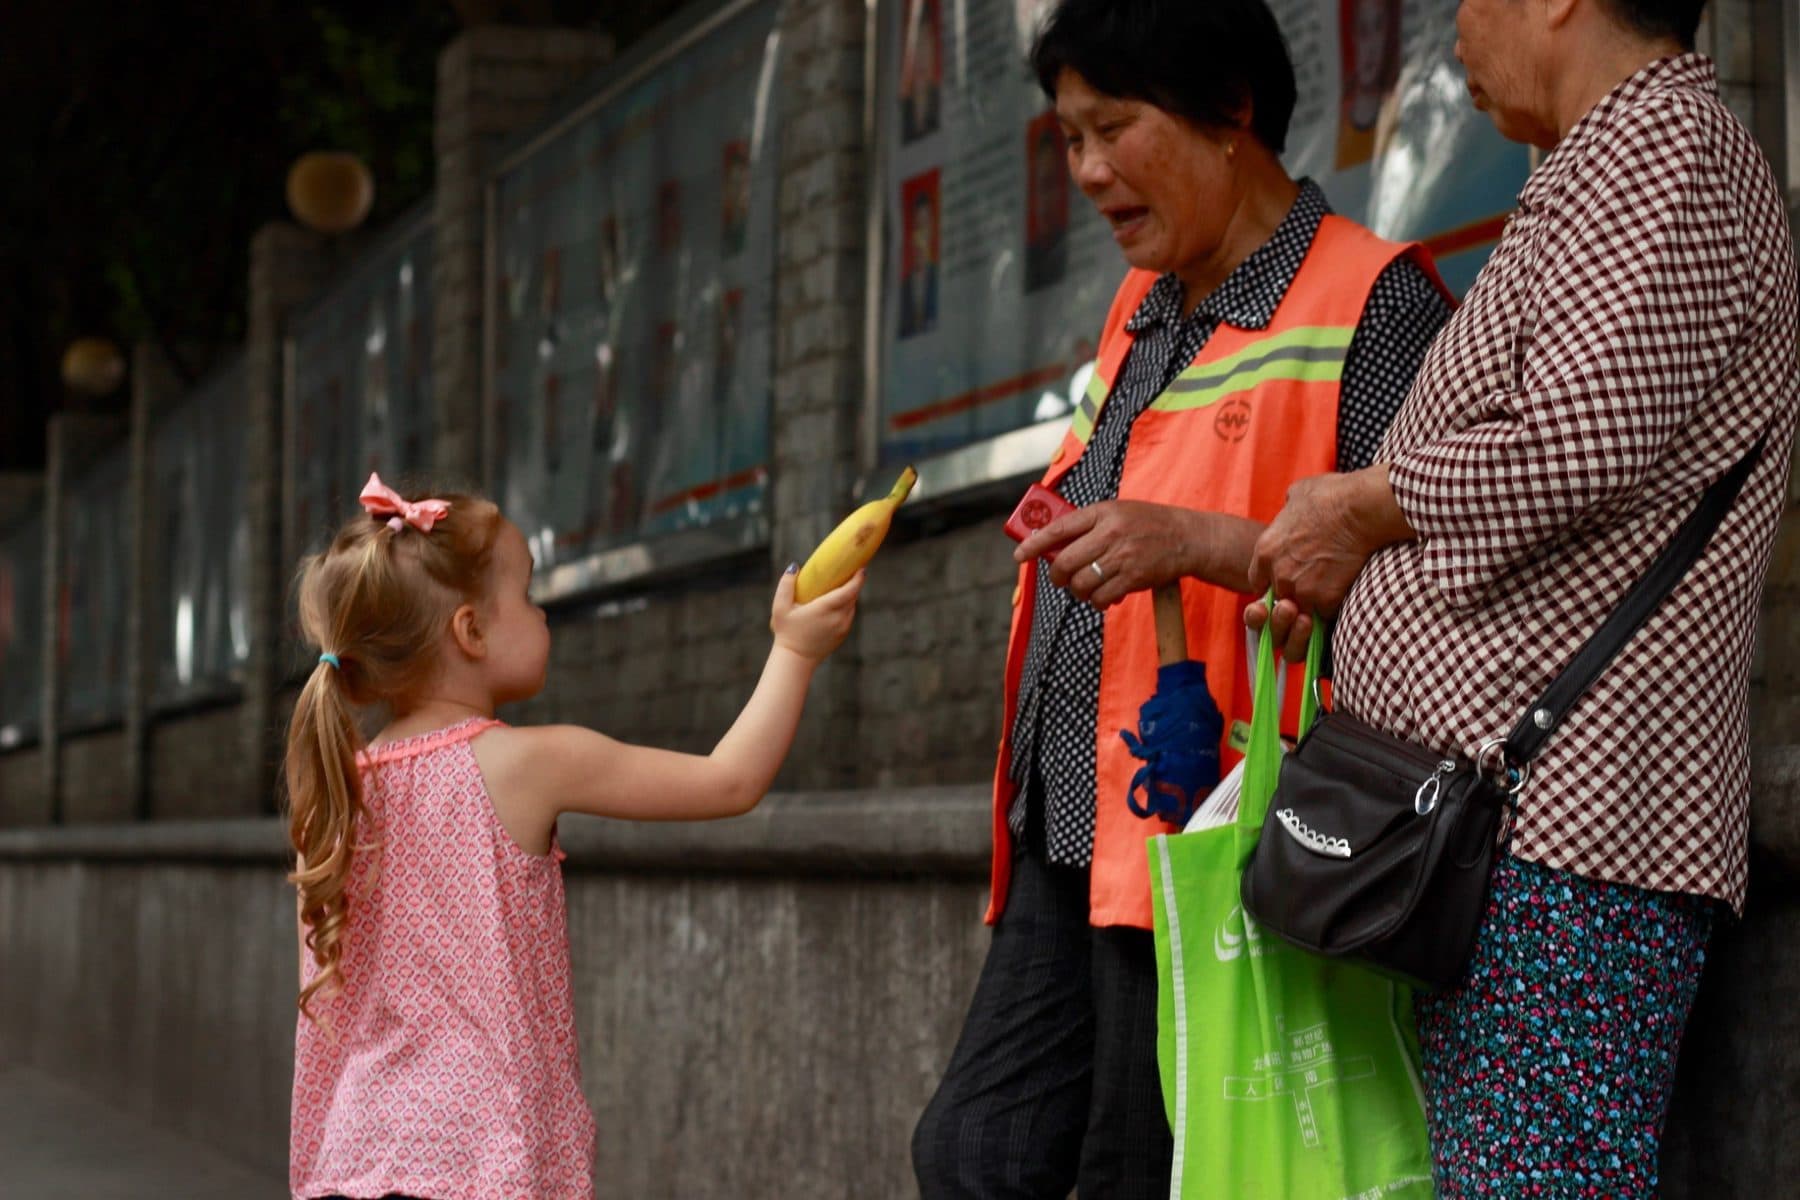 A missionary's young child gives a banana to two older ladies on the street